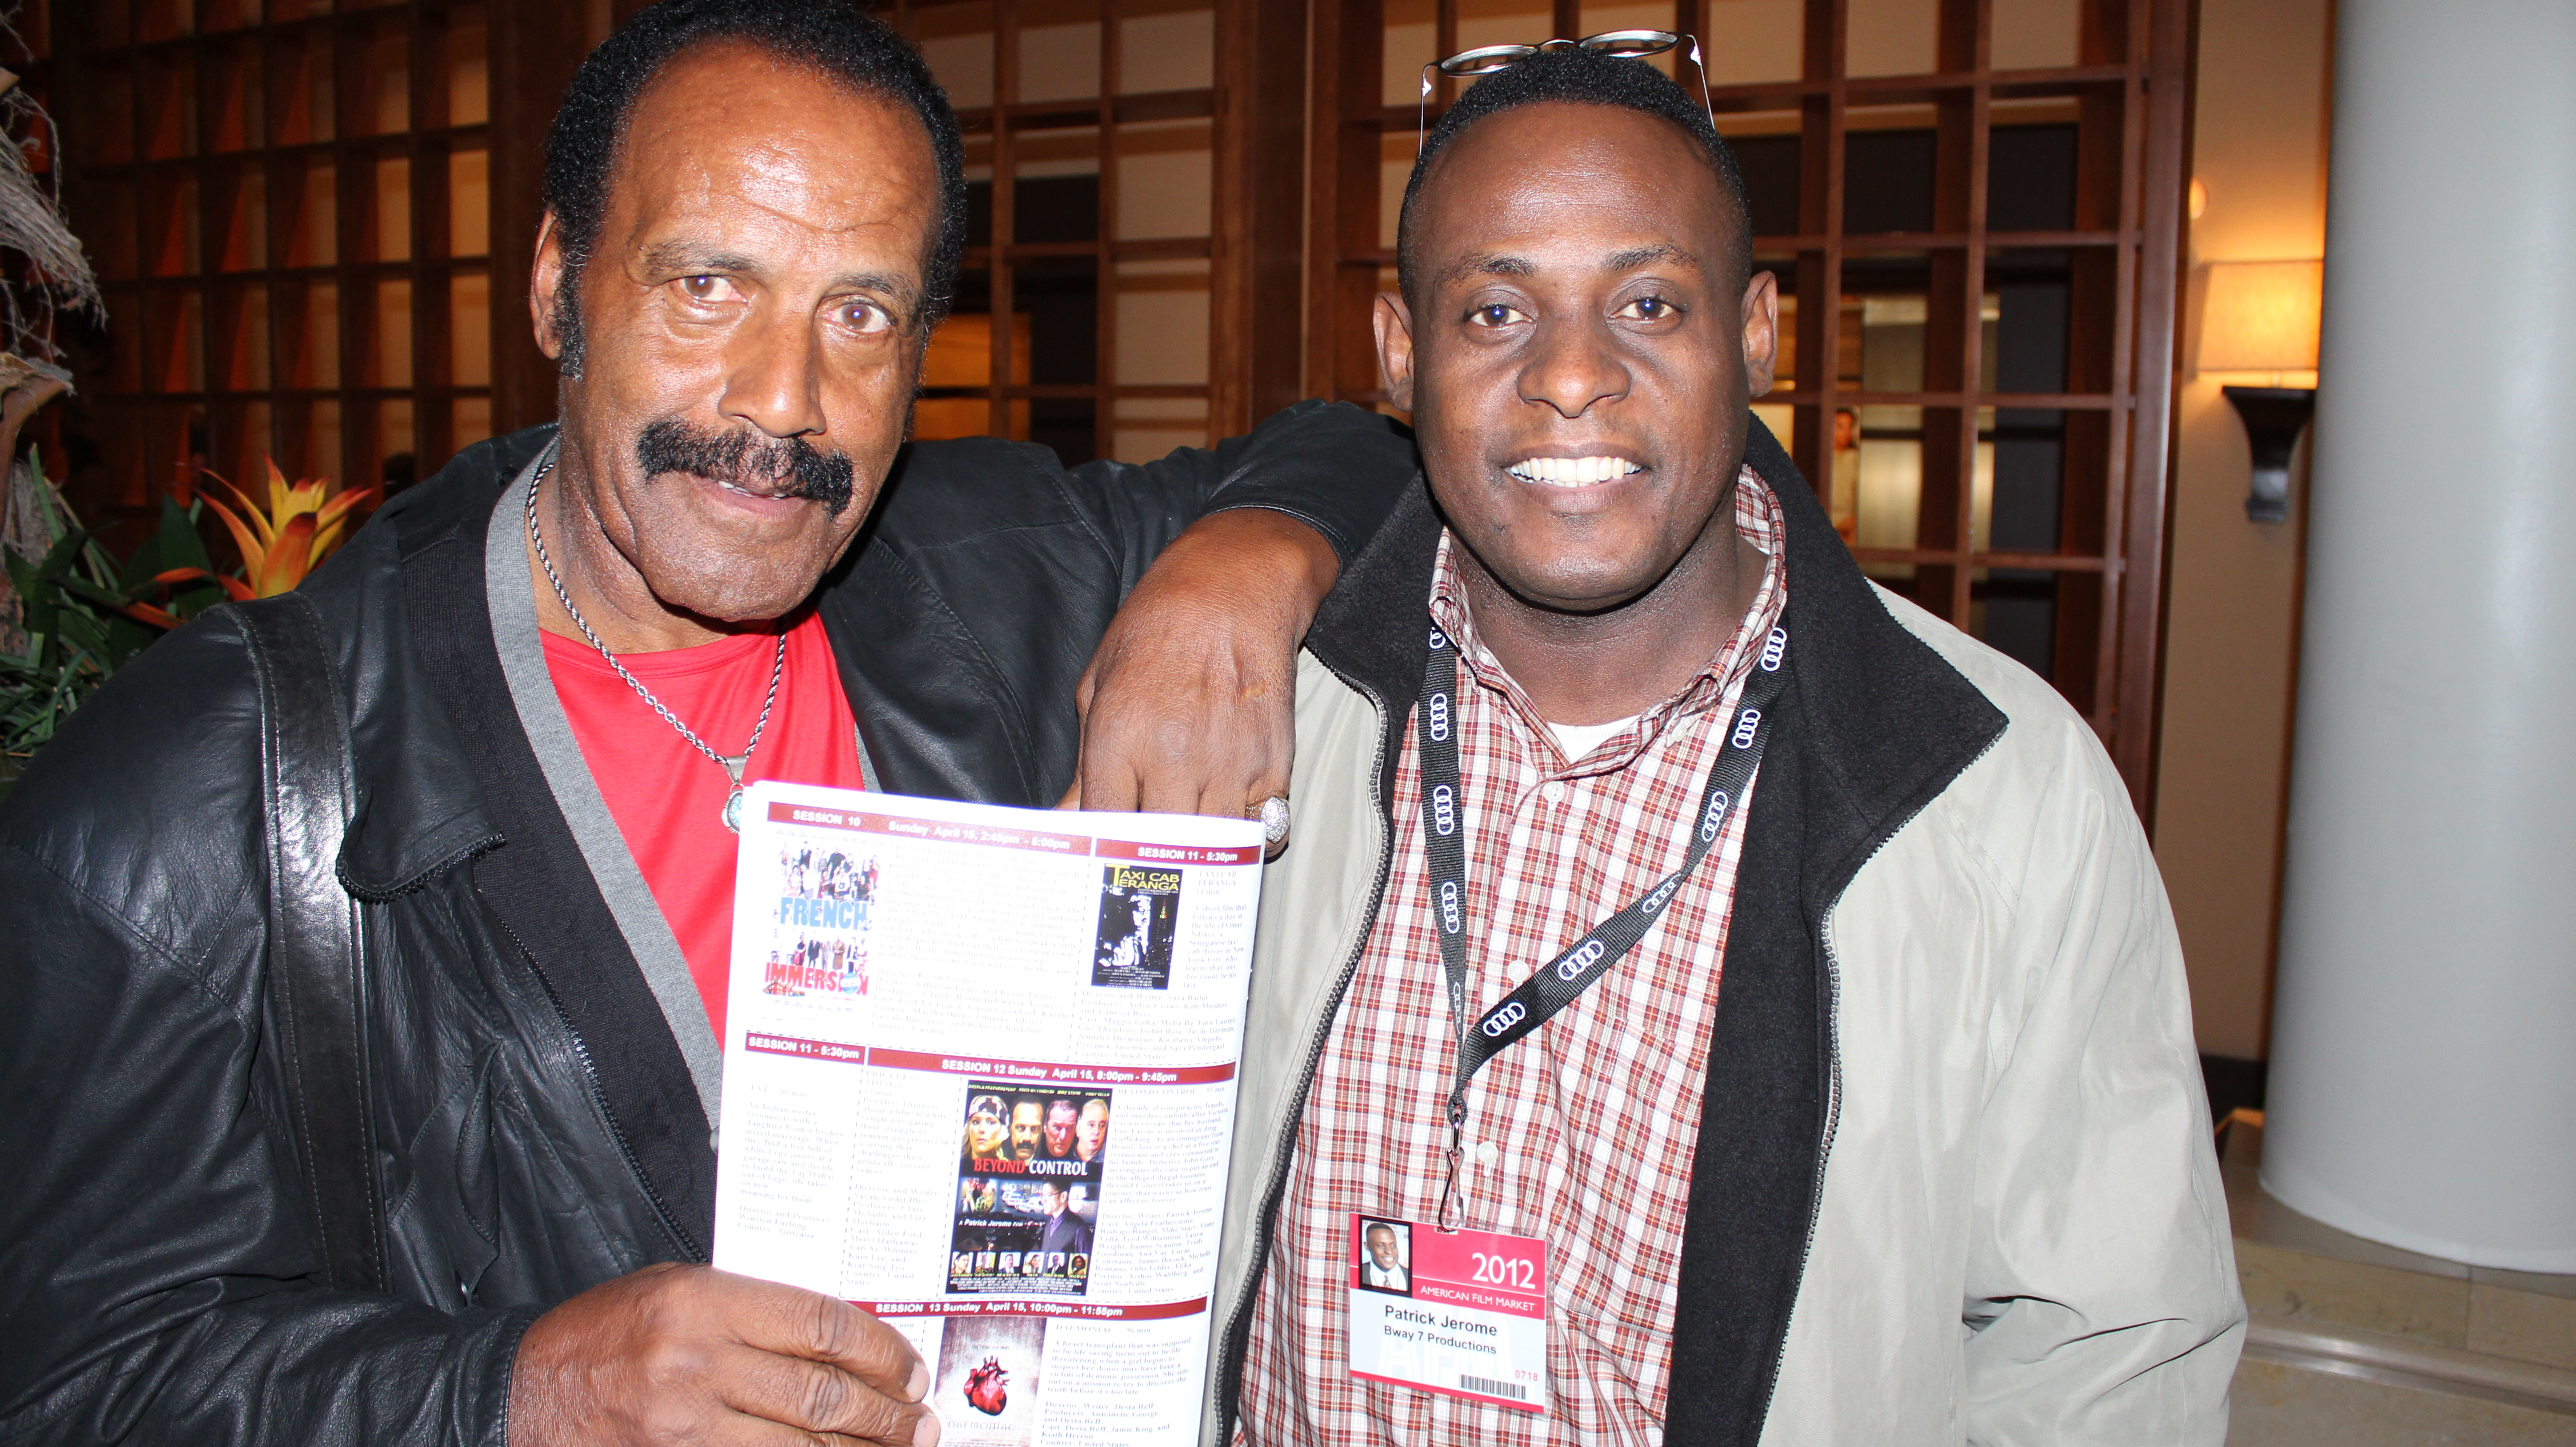 Fred Williamson and Patrick Jerome